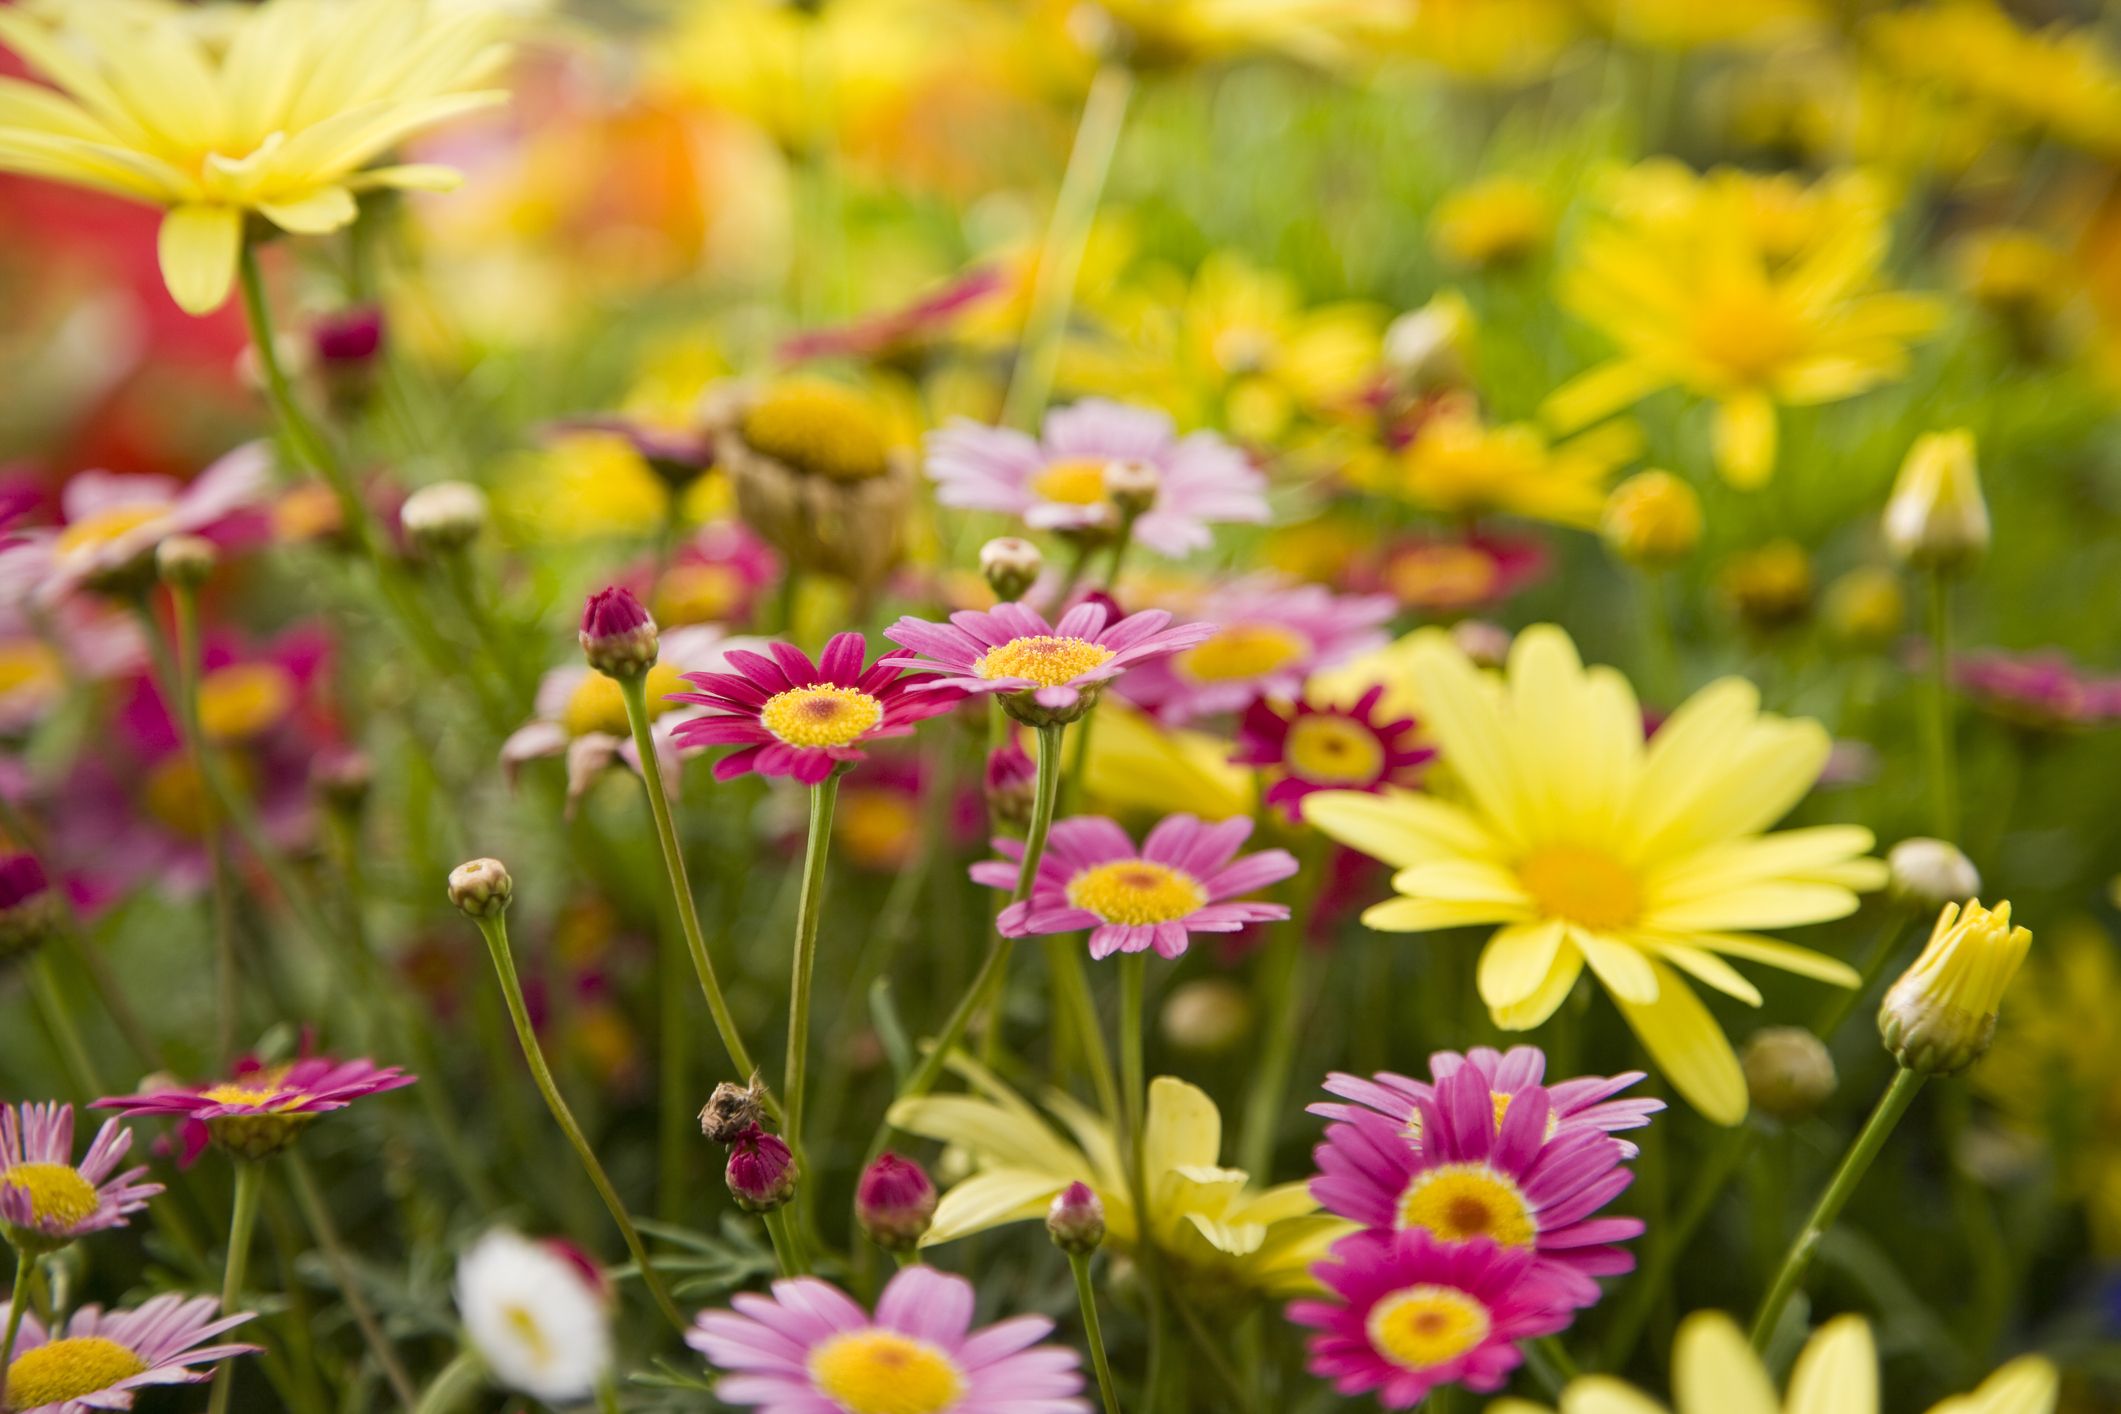 25 Colorful Types Of Daisies - Daisy Varieties For Your Garden